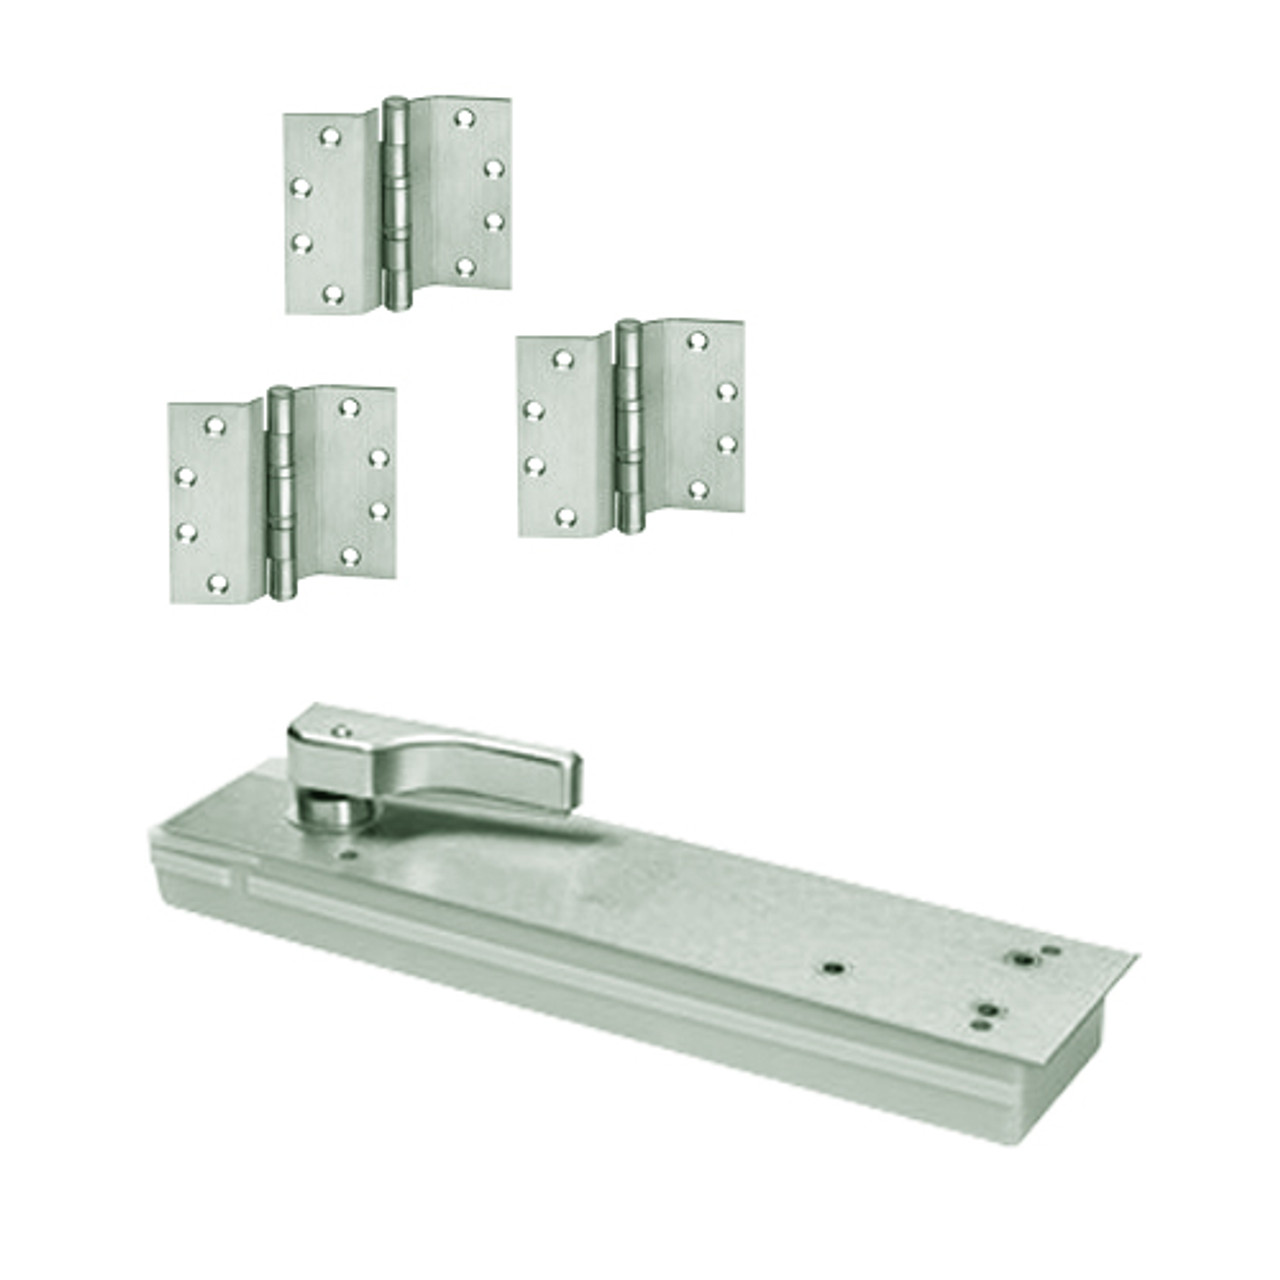 HM5103ABC90-LH-619 Rixson HM51 Series 3/4" Offset Hung Shallow Depth Floor Closers in Satin Nickel Finish